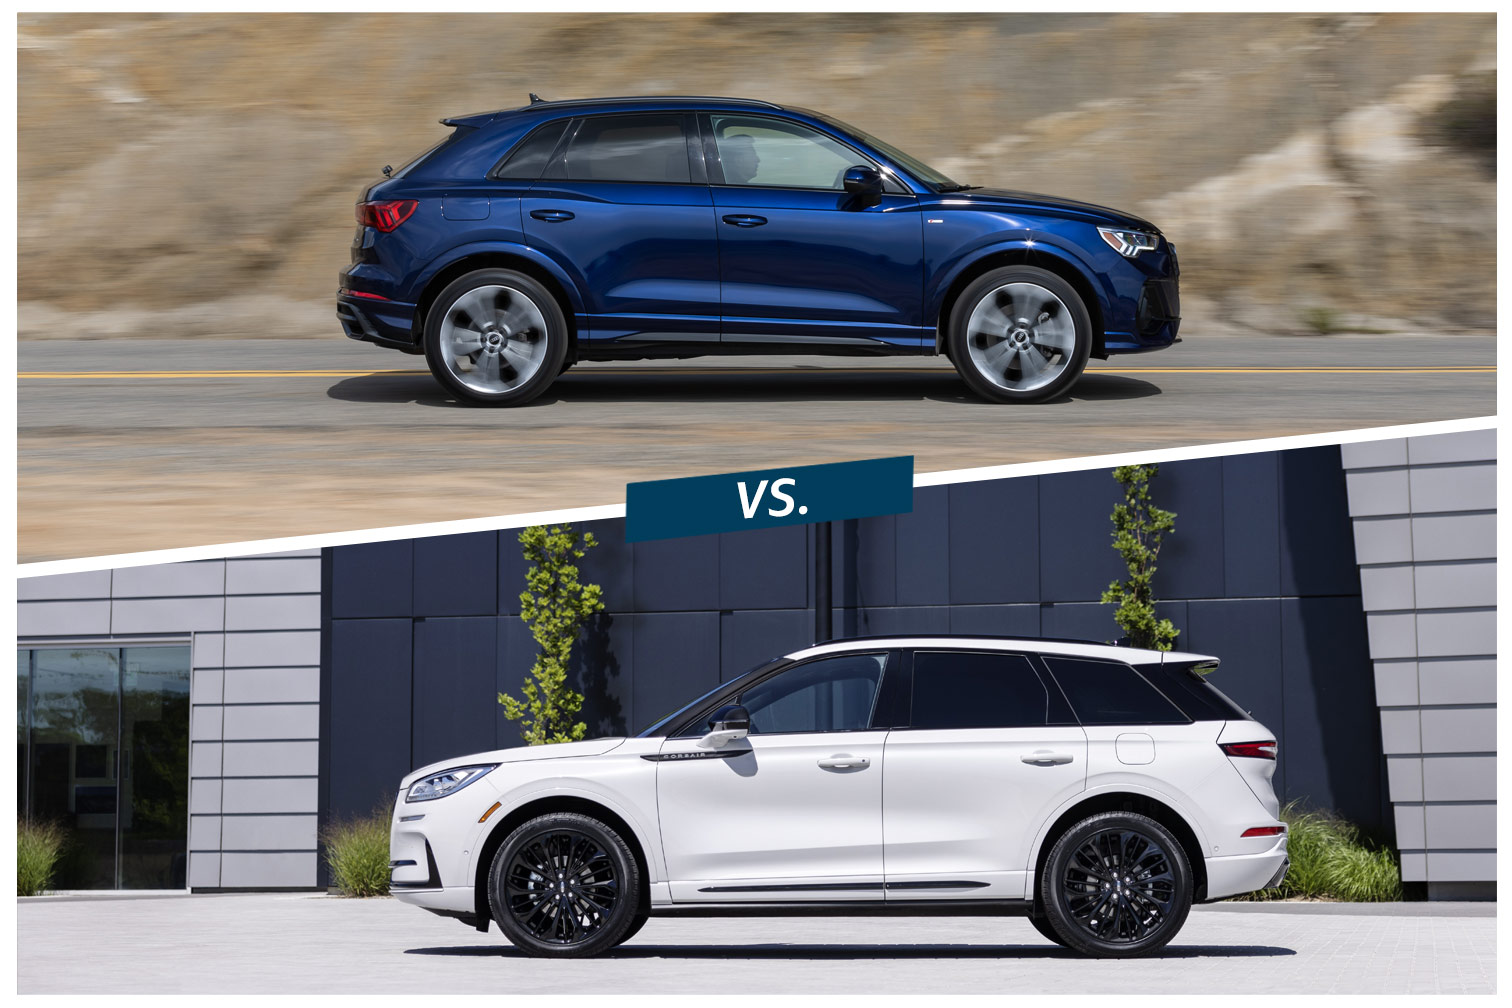 Blue Audi Q3 on top of split image with white Lincoln Corsair beneath